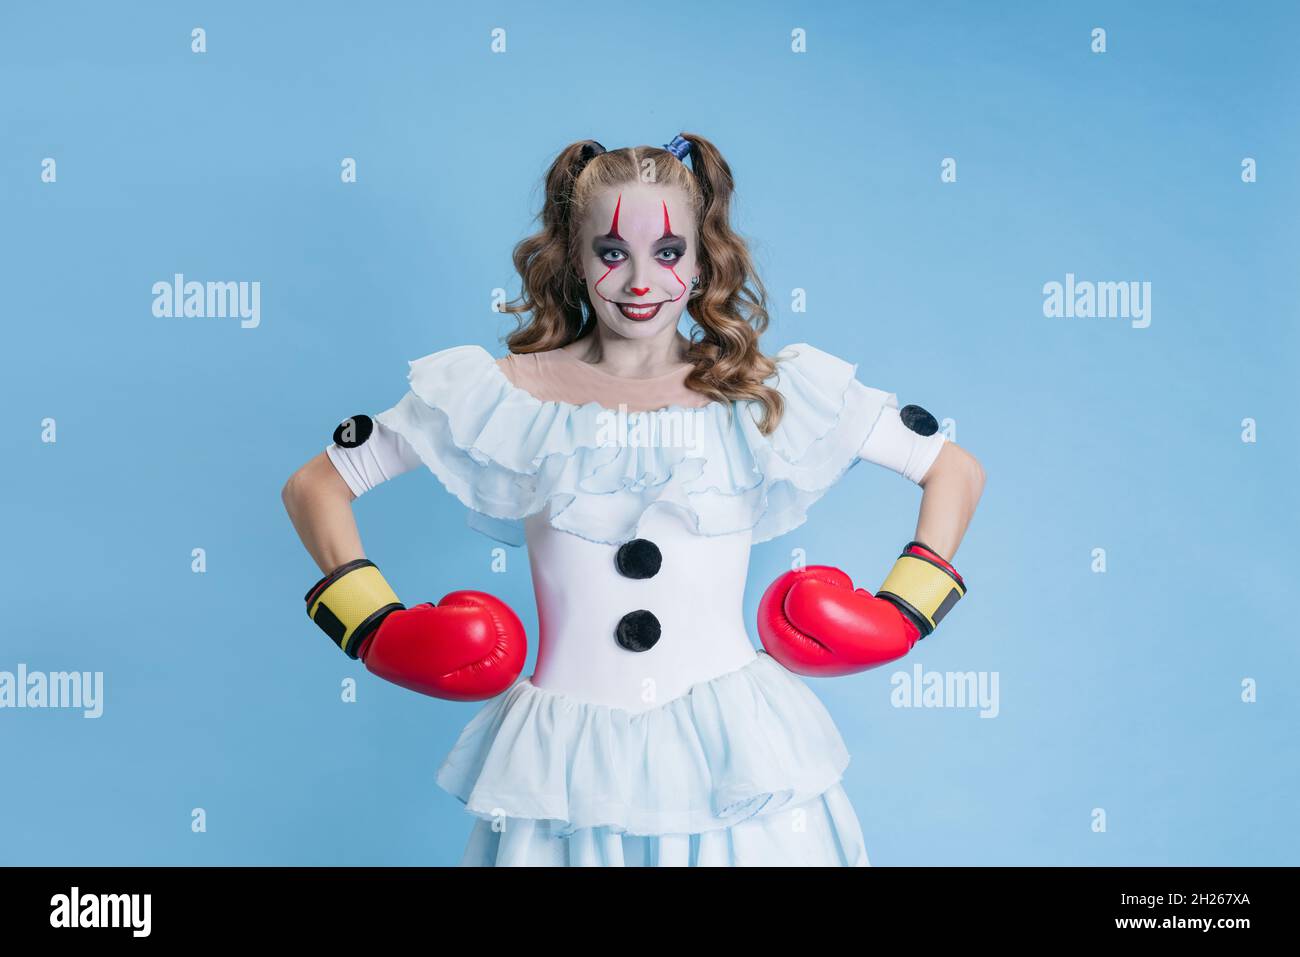 Portrait of charismatic young girl in Halloween costume of movie character with spooky facial expression isolated over blue background Stock Photo